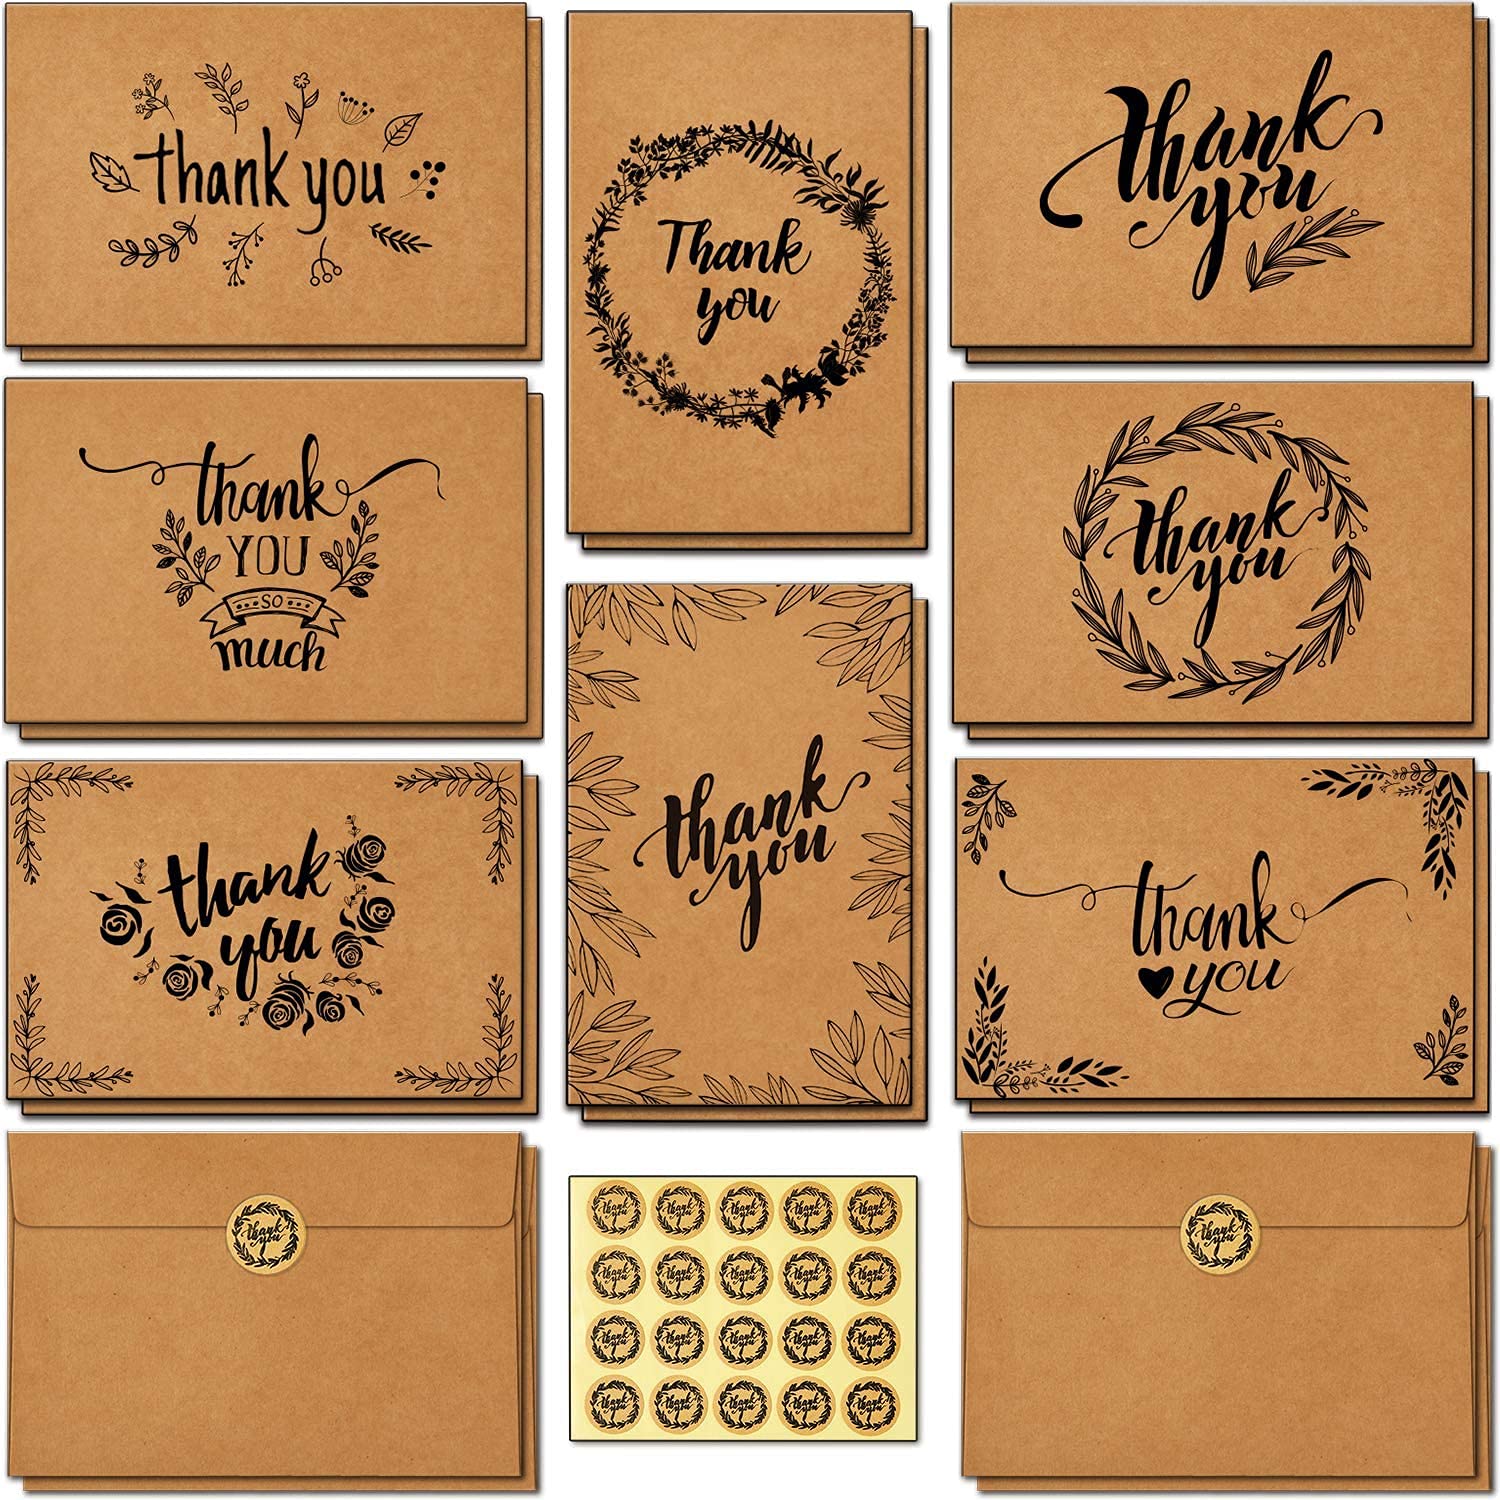 100 Thank You Cards Bulk: Ohuhu Brown Kraft Blank Thank You Notes Box Set with Self-Seal Envelopes and Stickers - Elegant 8 Design Greeting Card for Wedding Shower Business Graduation Birthday - 4 x 6